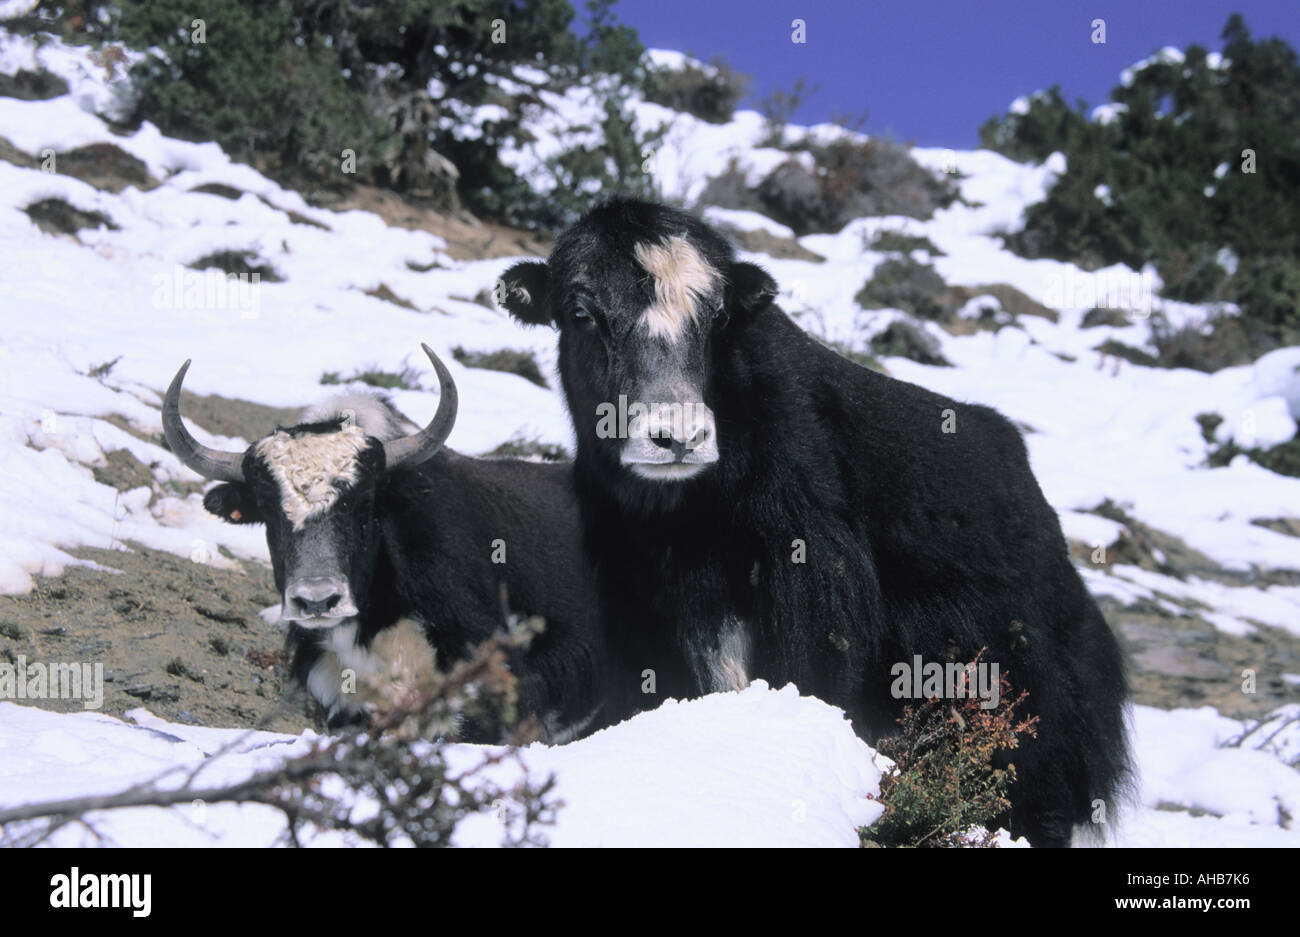 Yaks Bos grunniens in Ghyaru surroundings Annapurna Conservation Area Nepal Stock Photo